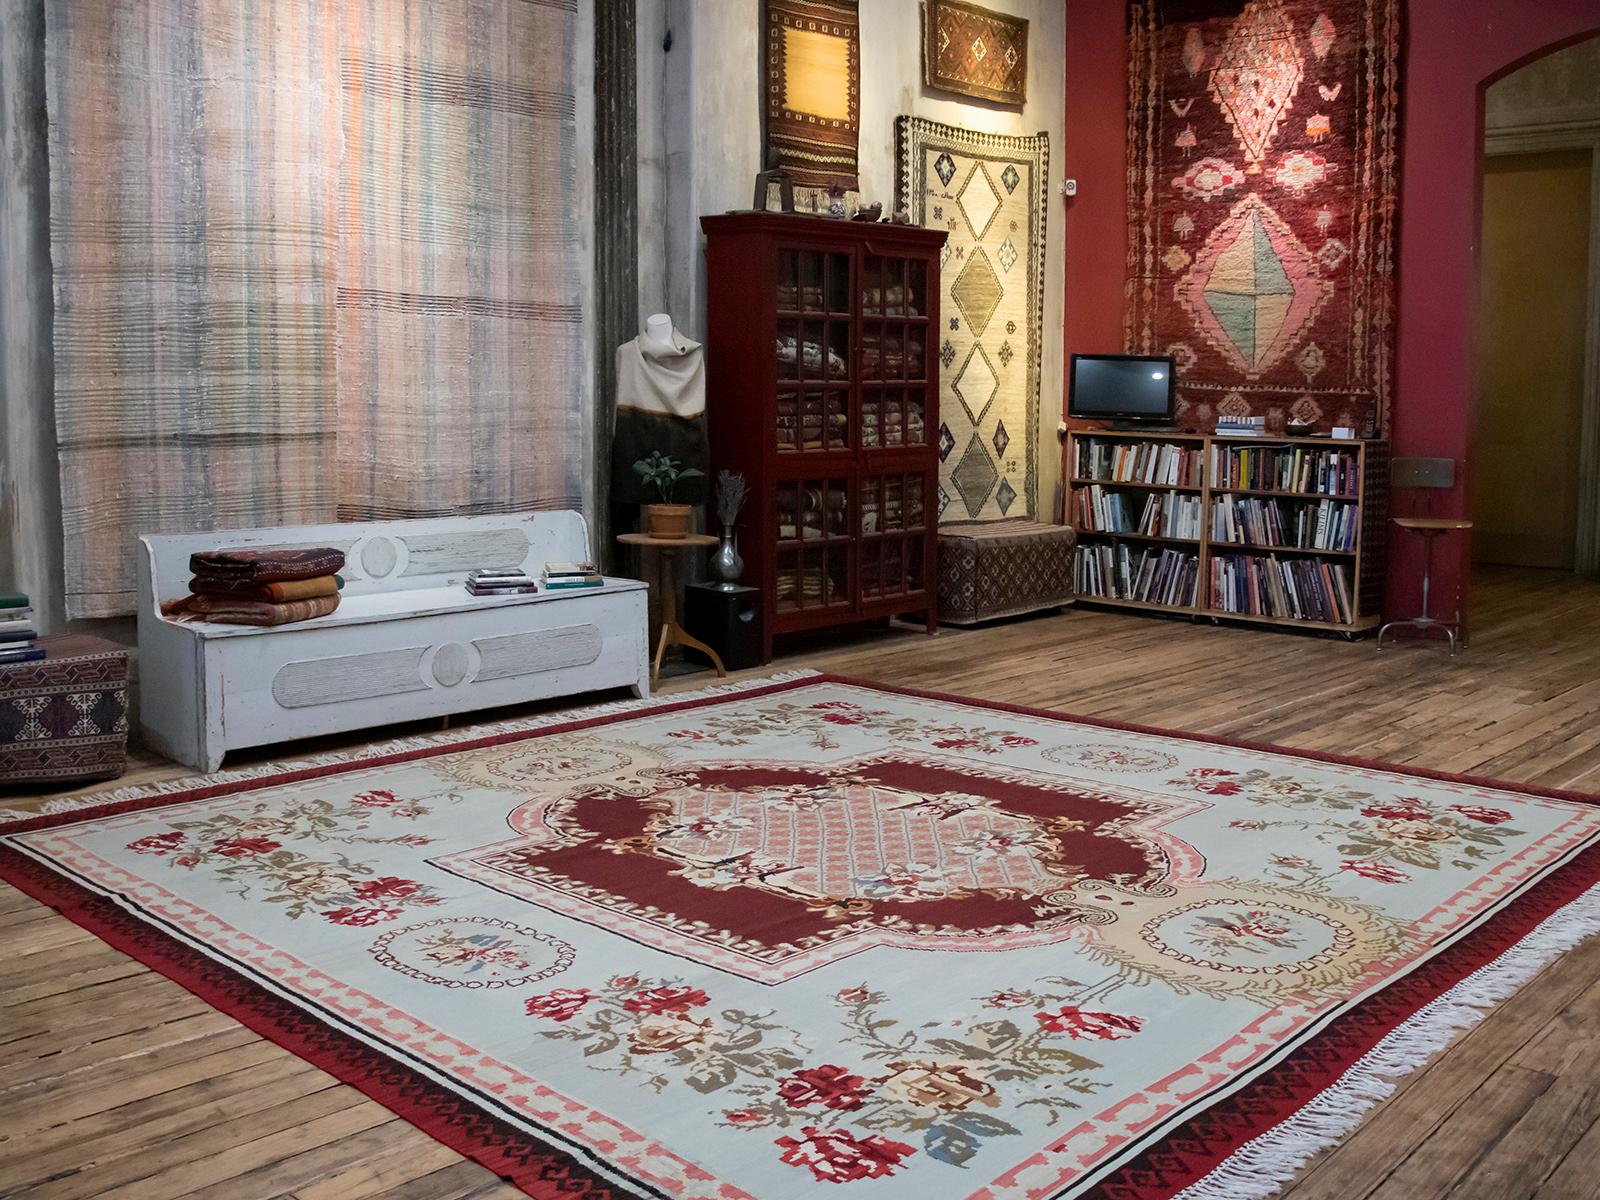 The elegance of a bygone era - an old kilim from Southeast Europe with a refined design and color palette that is seldom encountered among the many weavings of this prolific region.